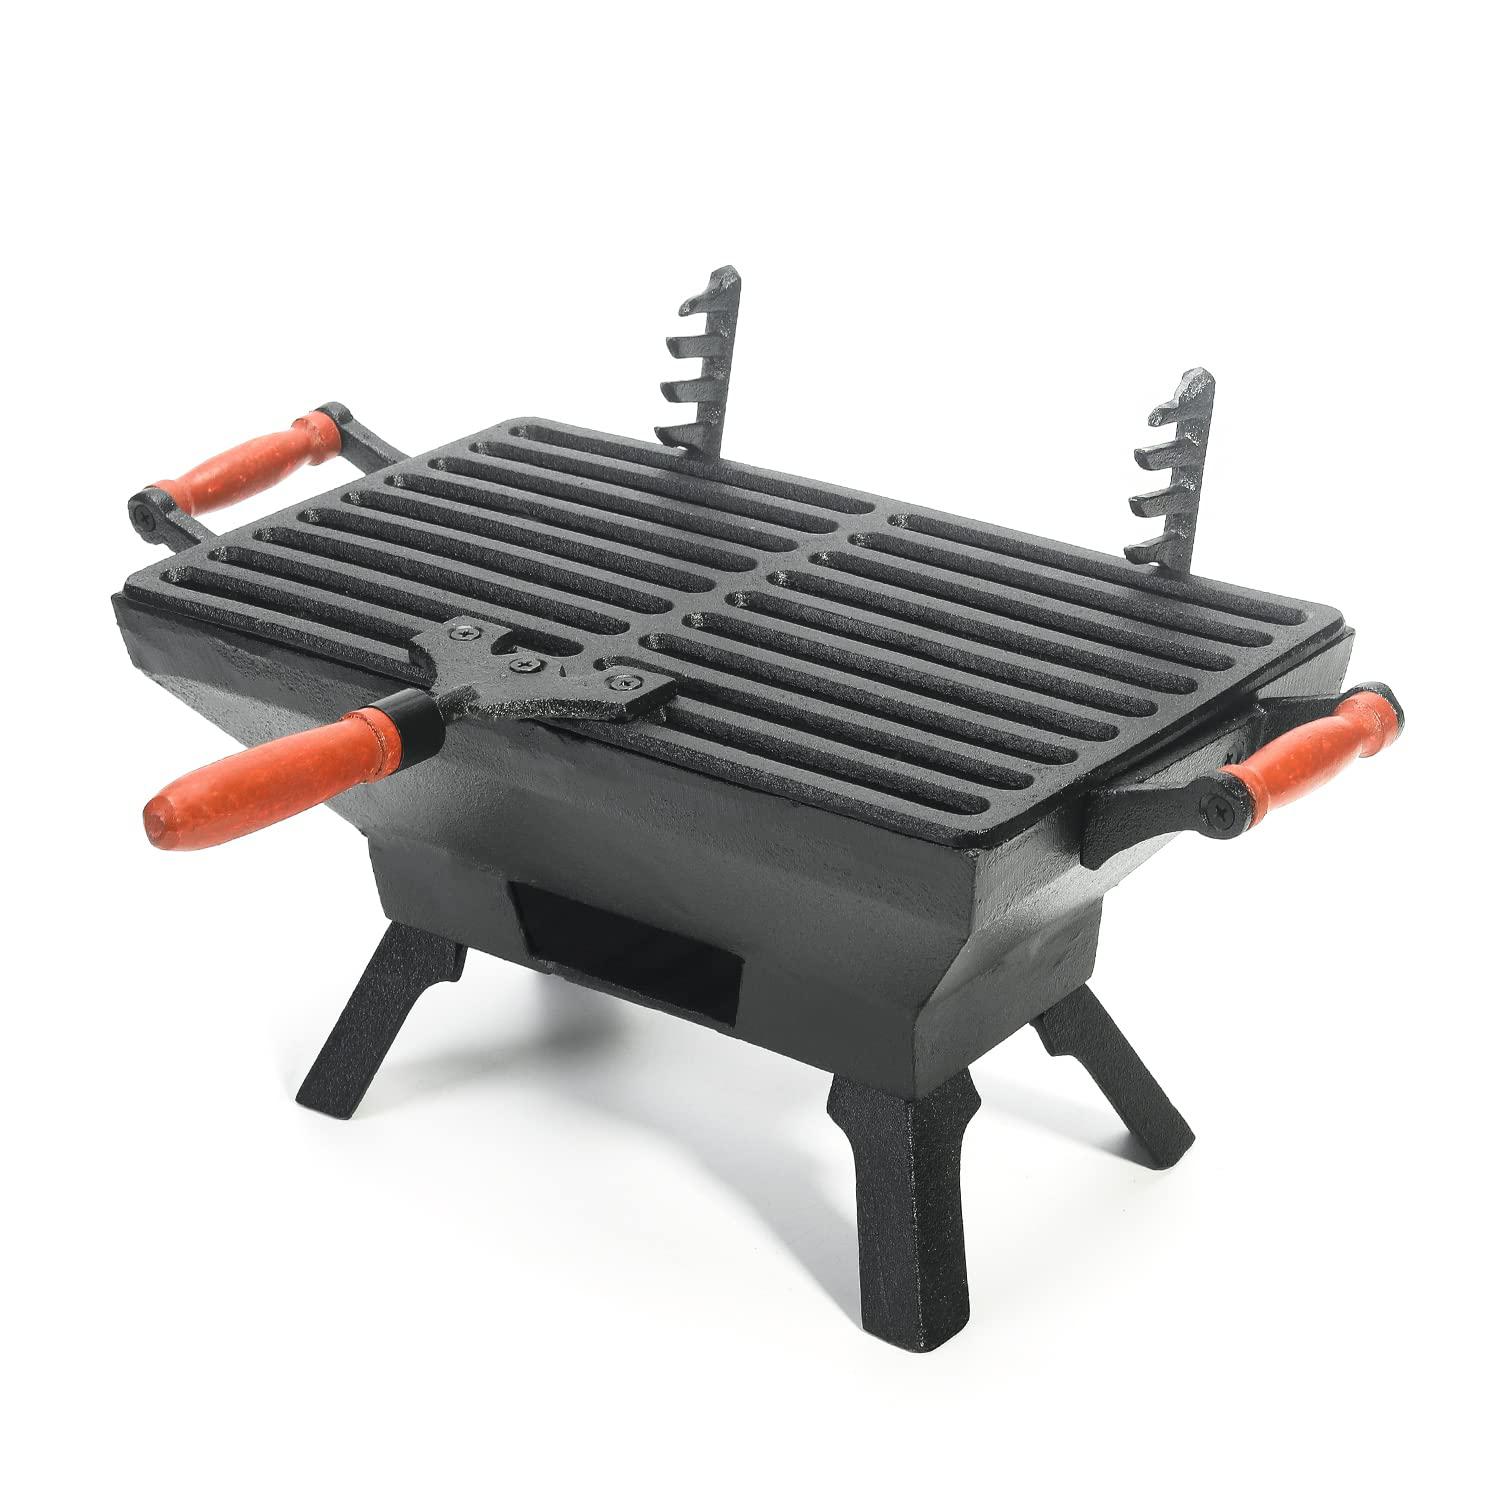 sungmor small rectangle cast iron charcoal grill stove, 12.4 by 6.8 inch, heavy duty tabletop bbq grill, indoor outdoor porta